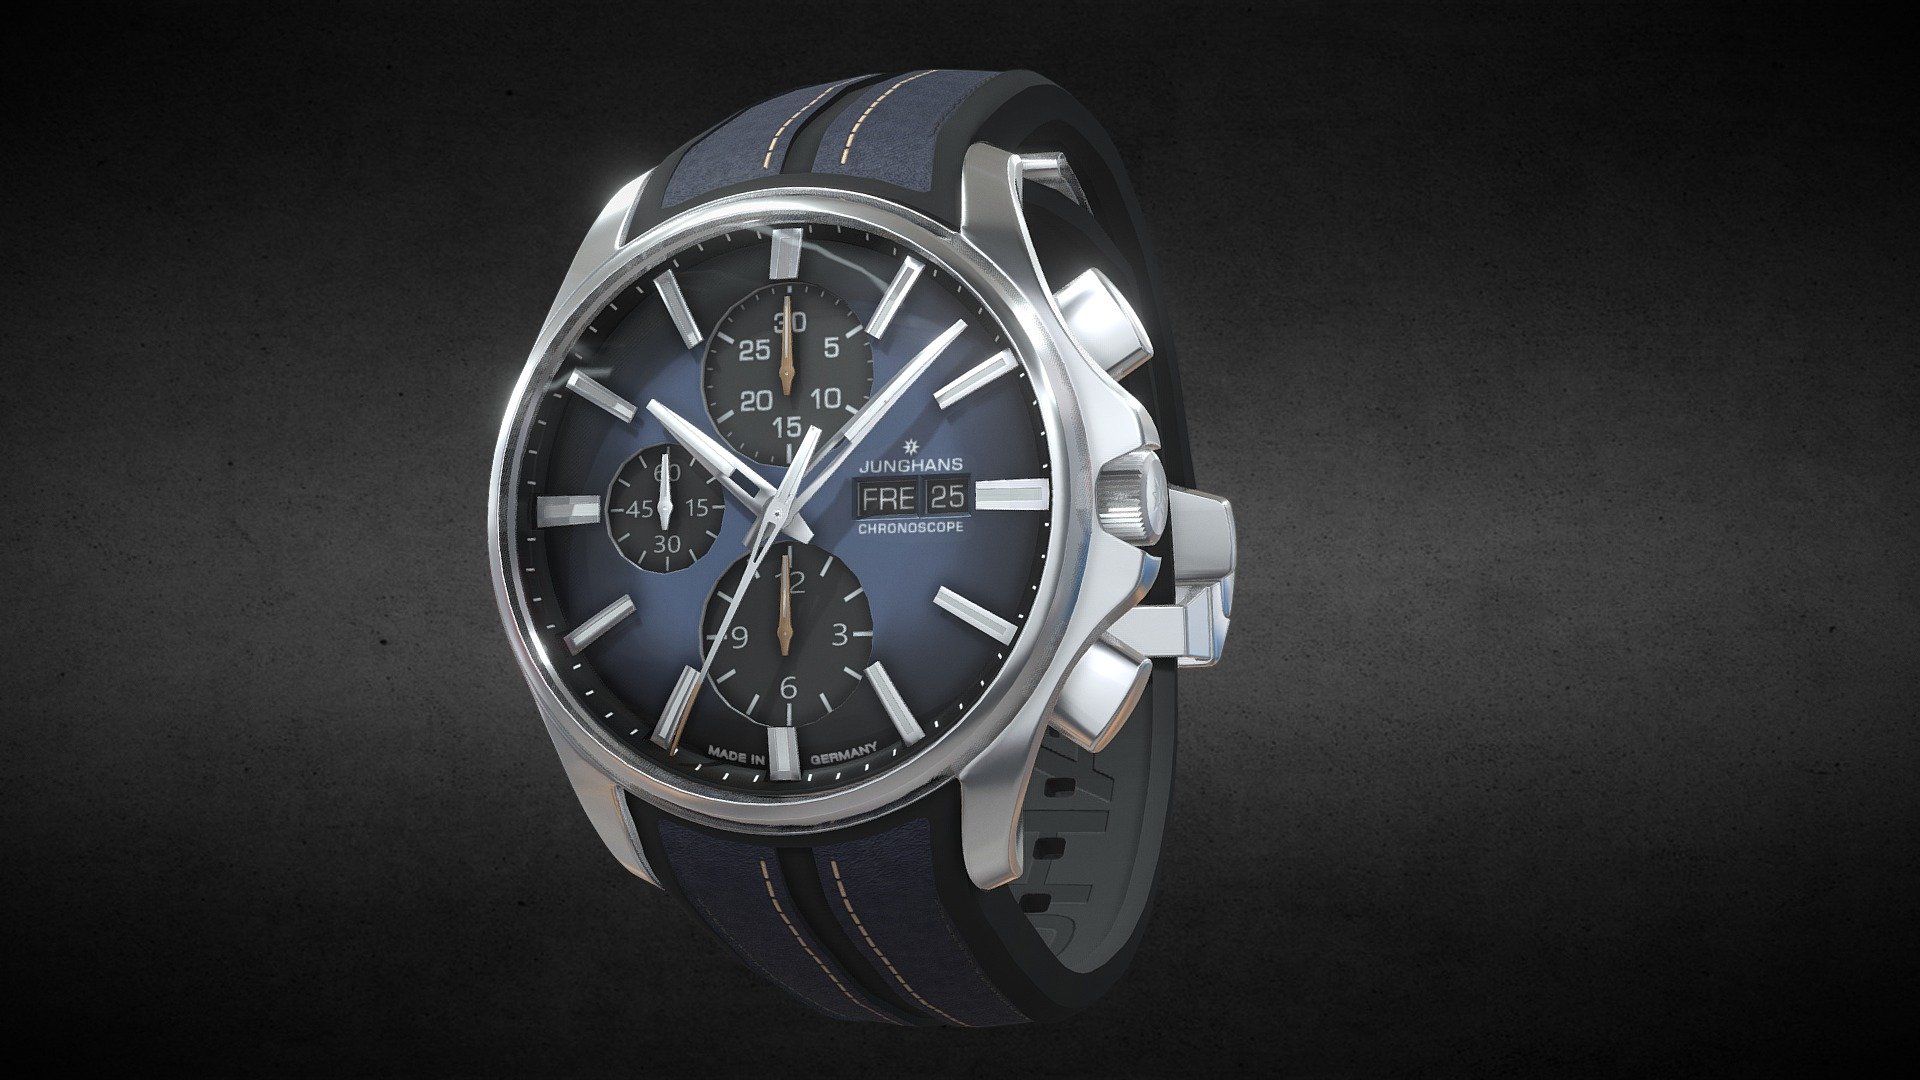 Awesome stainless steel Meister S Chronoscope 27-4227.00 Watch․
Use for Unreal Engine 4 and Unity3D. Try in augmented reality in the AR-Watches app. 
Links to the app: Android, iOS

Currently available for download in FBX format.

3D model developed by AR-Watches

Disclaimer: We do not own the design of the watch, we only made the 3D model 3d model